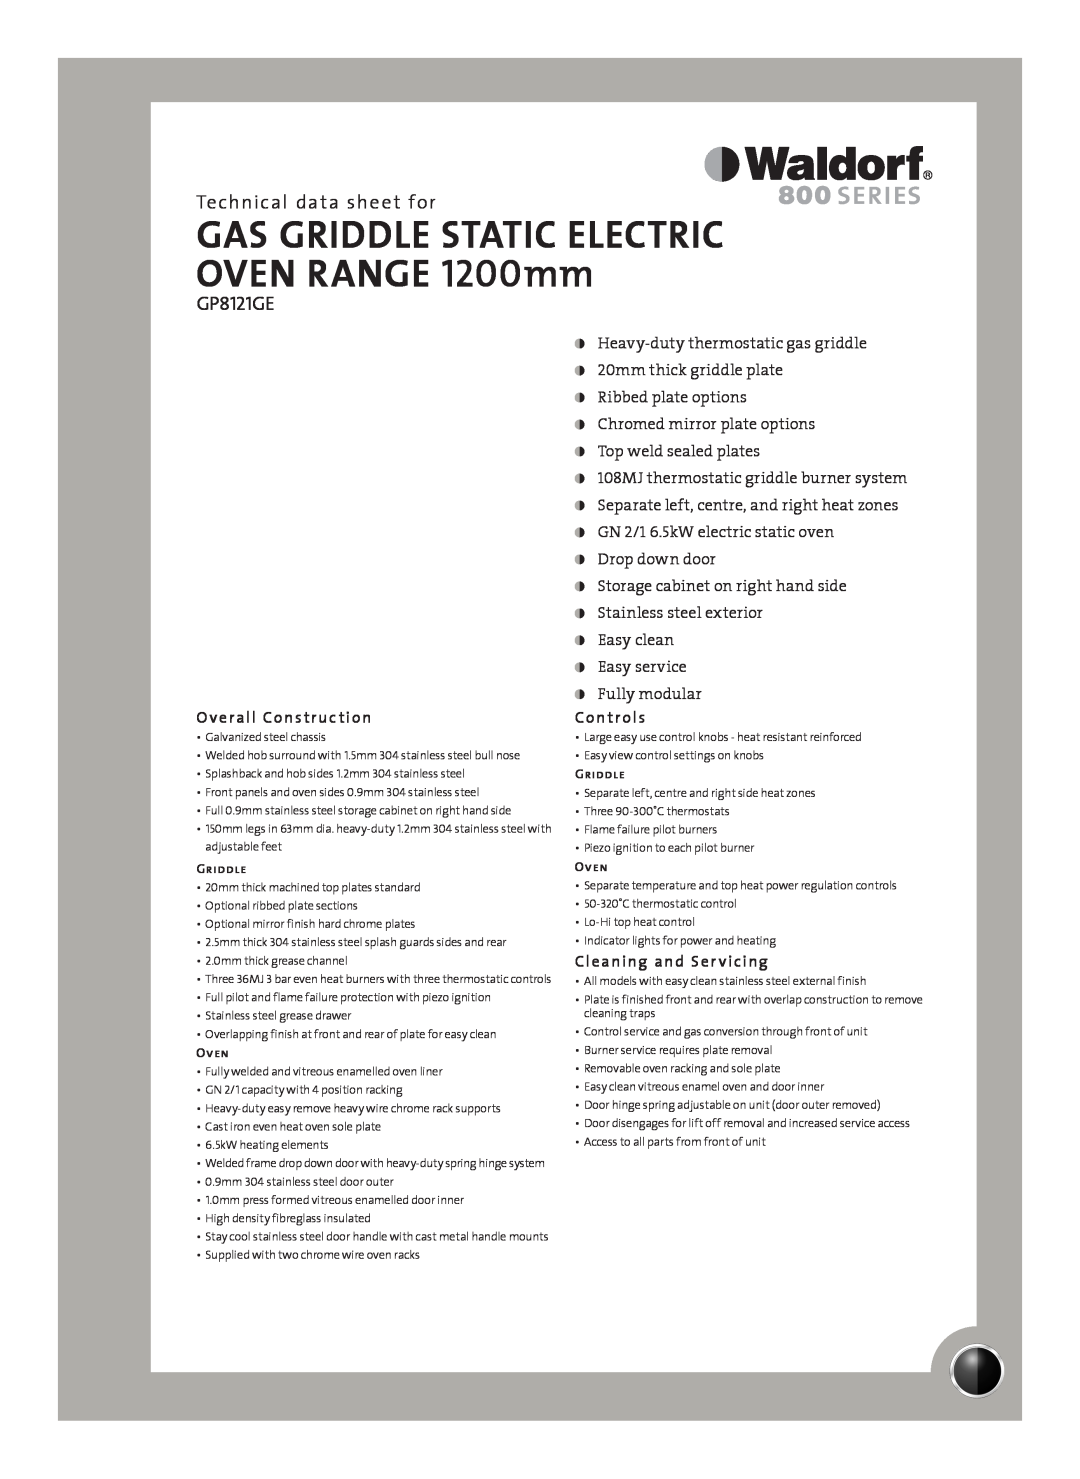 Moffat GP8121GE manual Technical data sheet for, Overall Construction, Controls, Cleaning and Ser vicing 